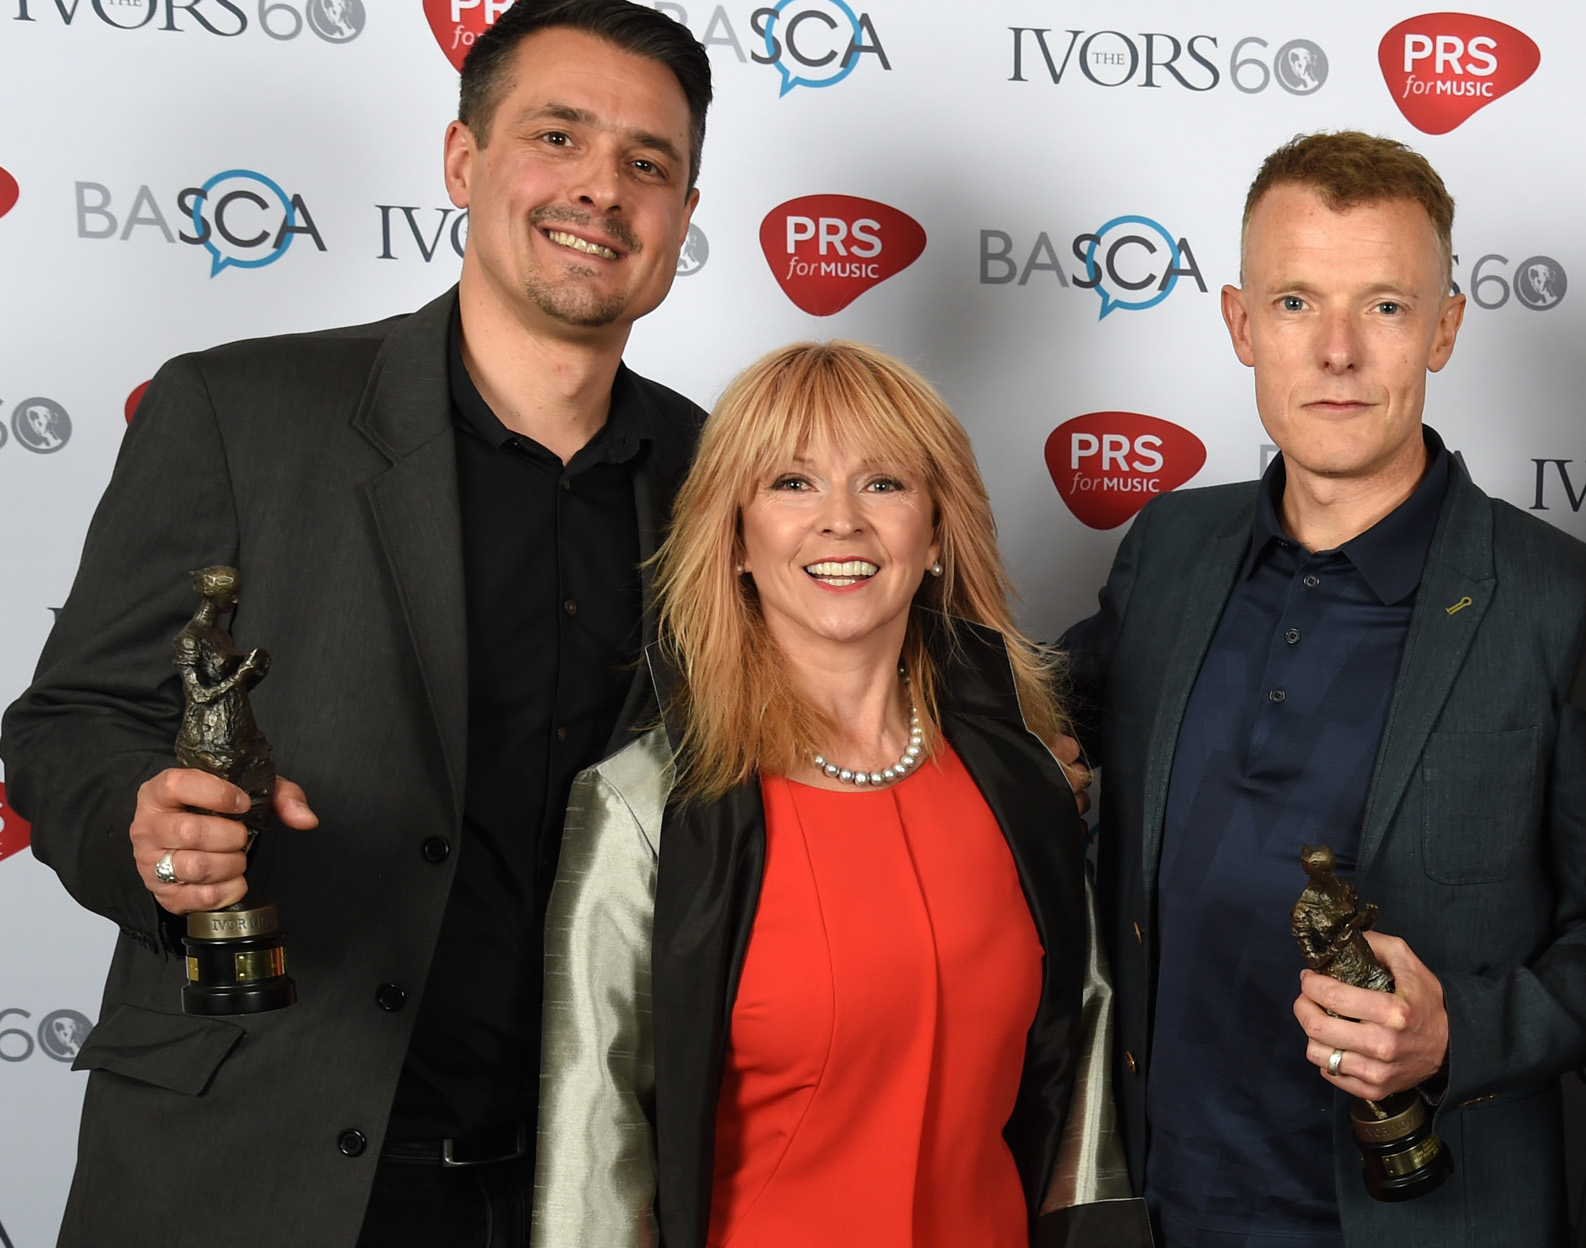 Chris (L) receiving Ivor Novello Award 2015 with client Martin Phipps and Toyah Wilcox